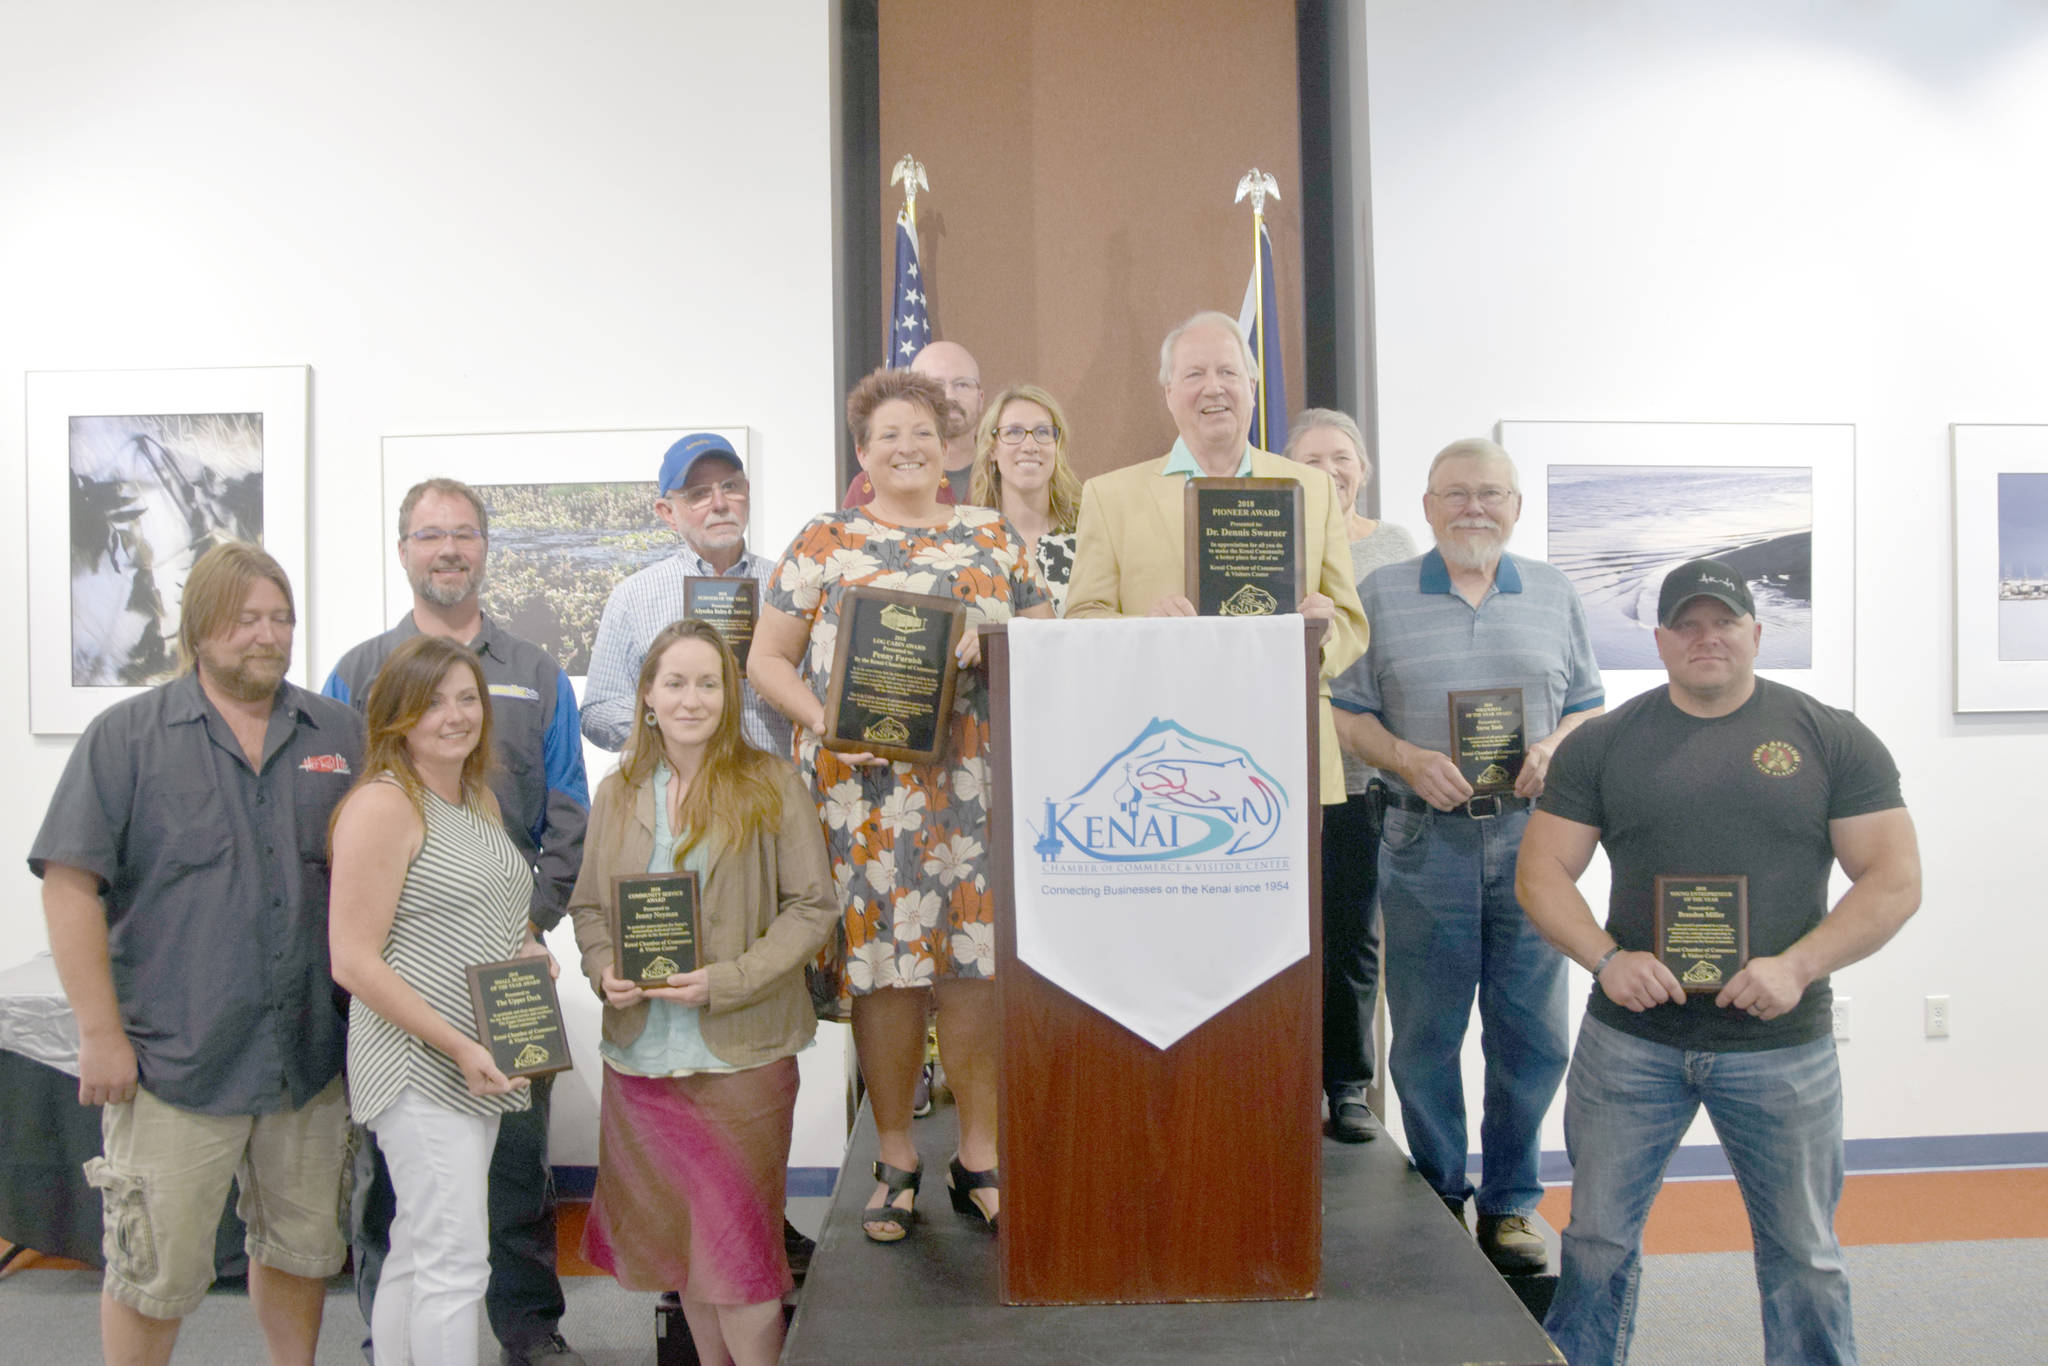 The recipients of the annual Kenai Community Awards pose for a photo during the Kenai Chamber of Commerce Luncheon at the Kenai Visitors and Cultural Center on June 19, 2019, in Kenai, Alaska. (Photo by Brian Mazurek/Peninsula Clarion)